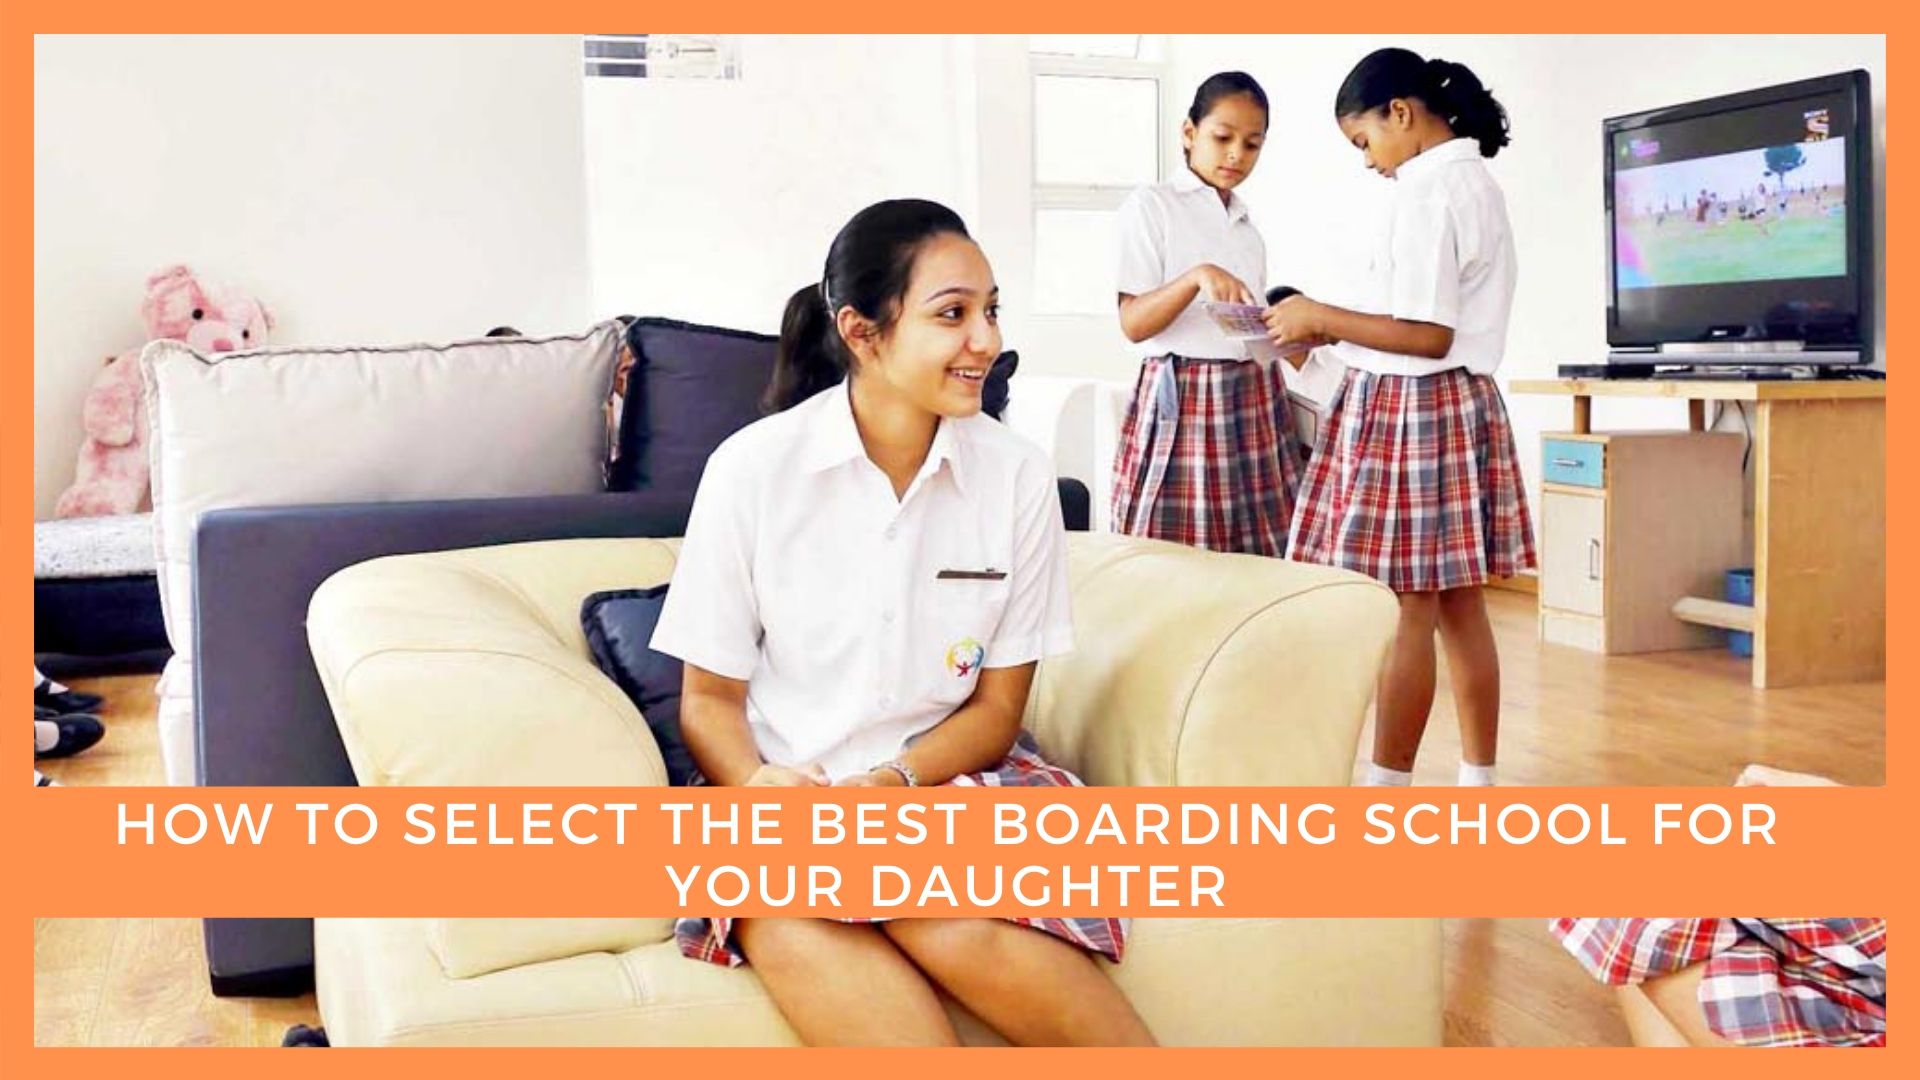 How to select the best boarding school for your daughter